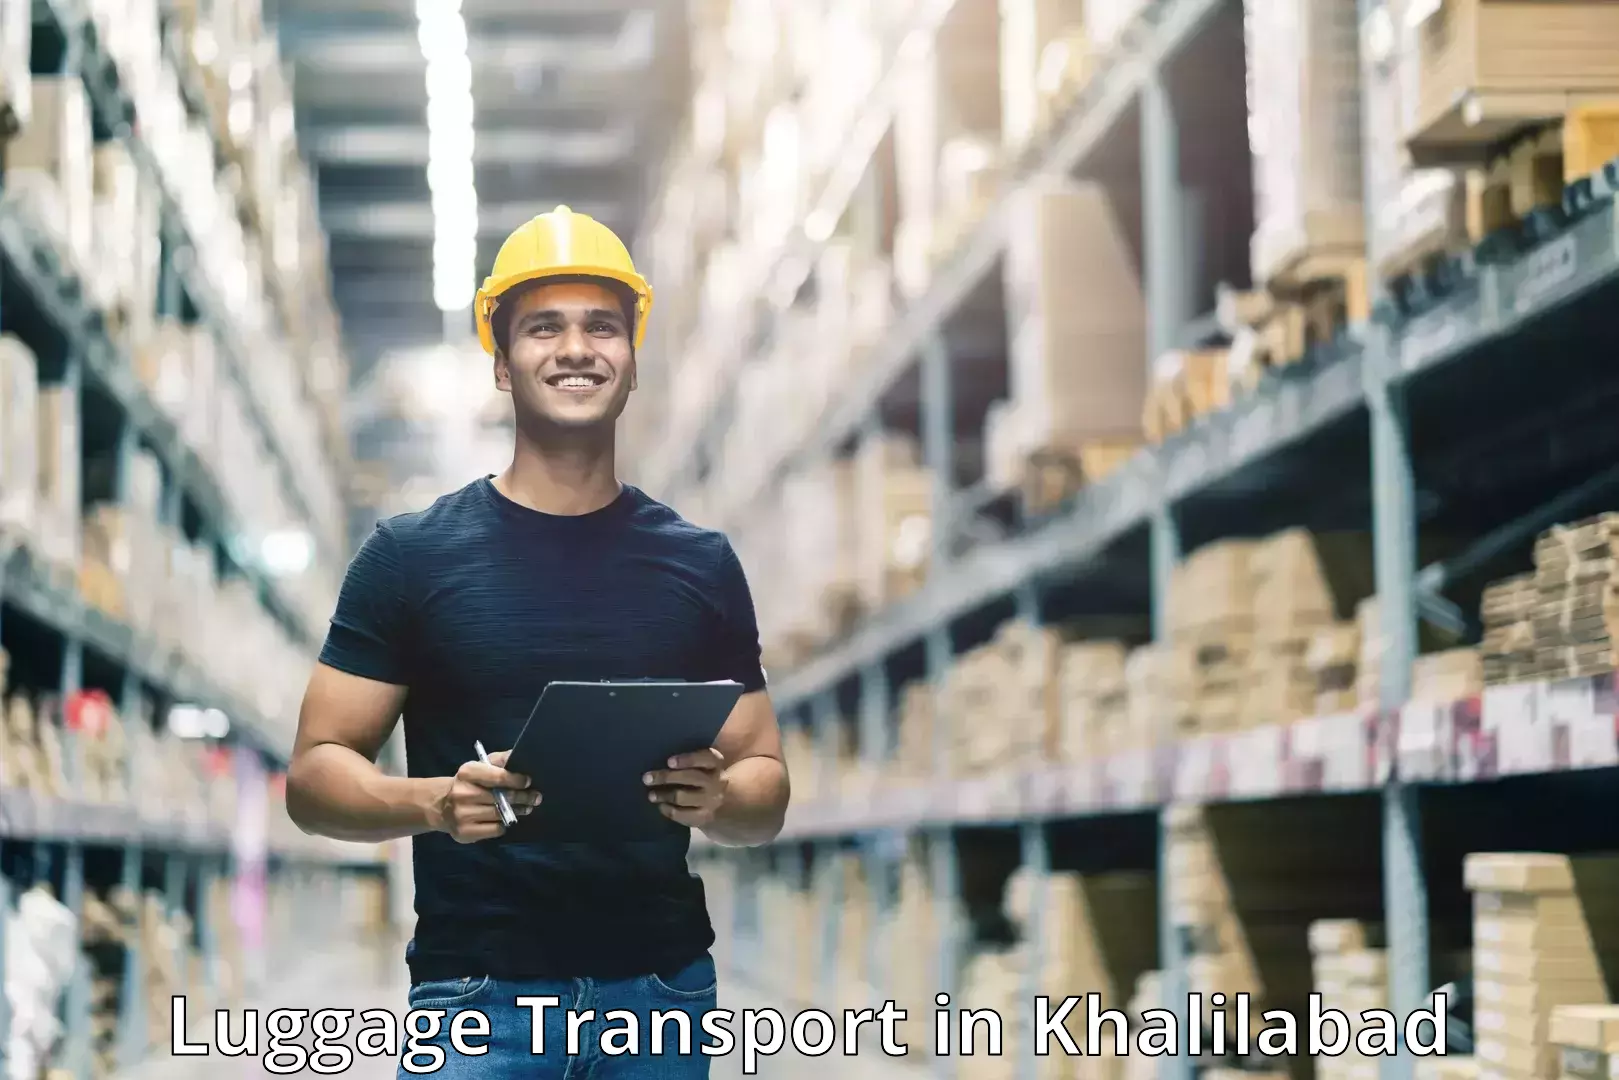 Luggage transport operations in Khalilabad